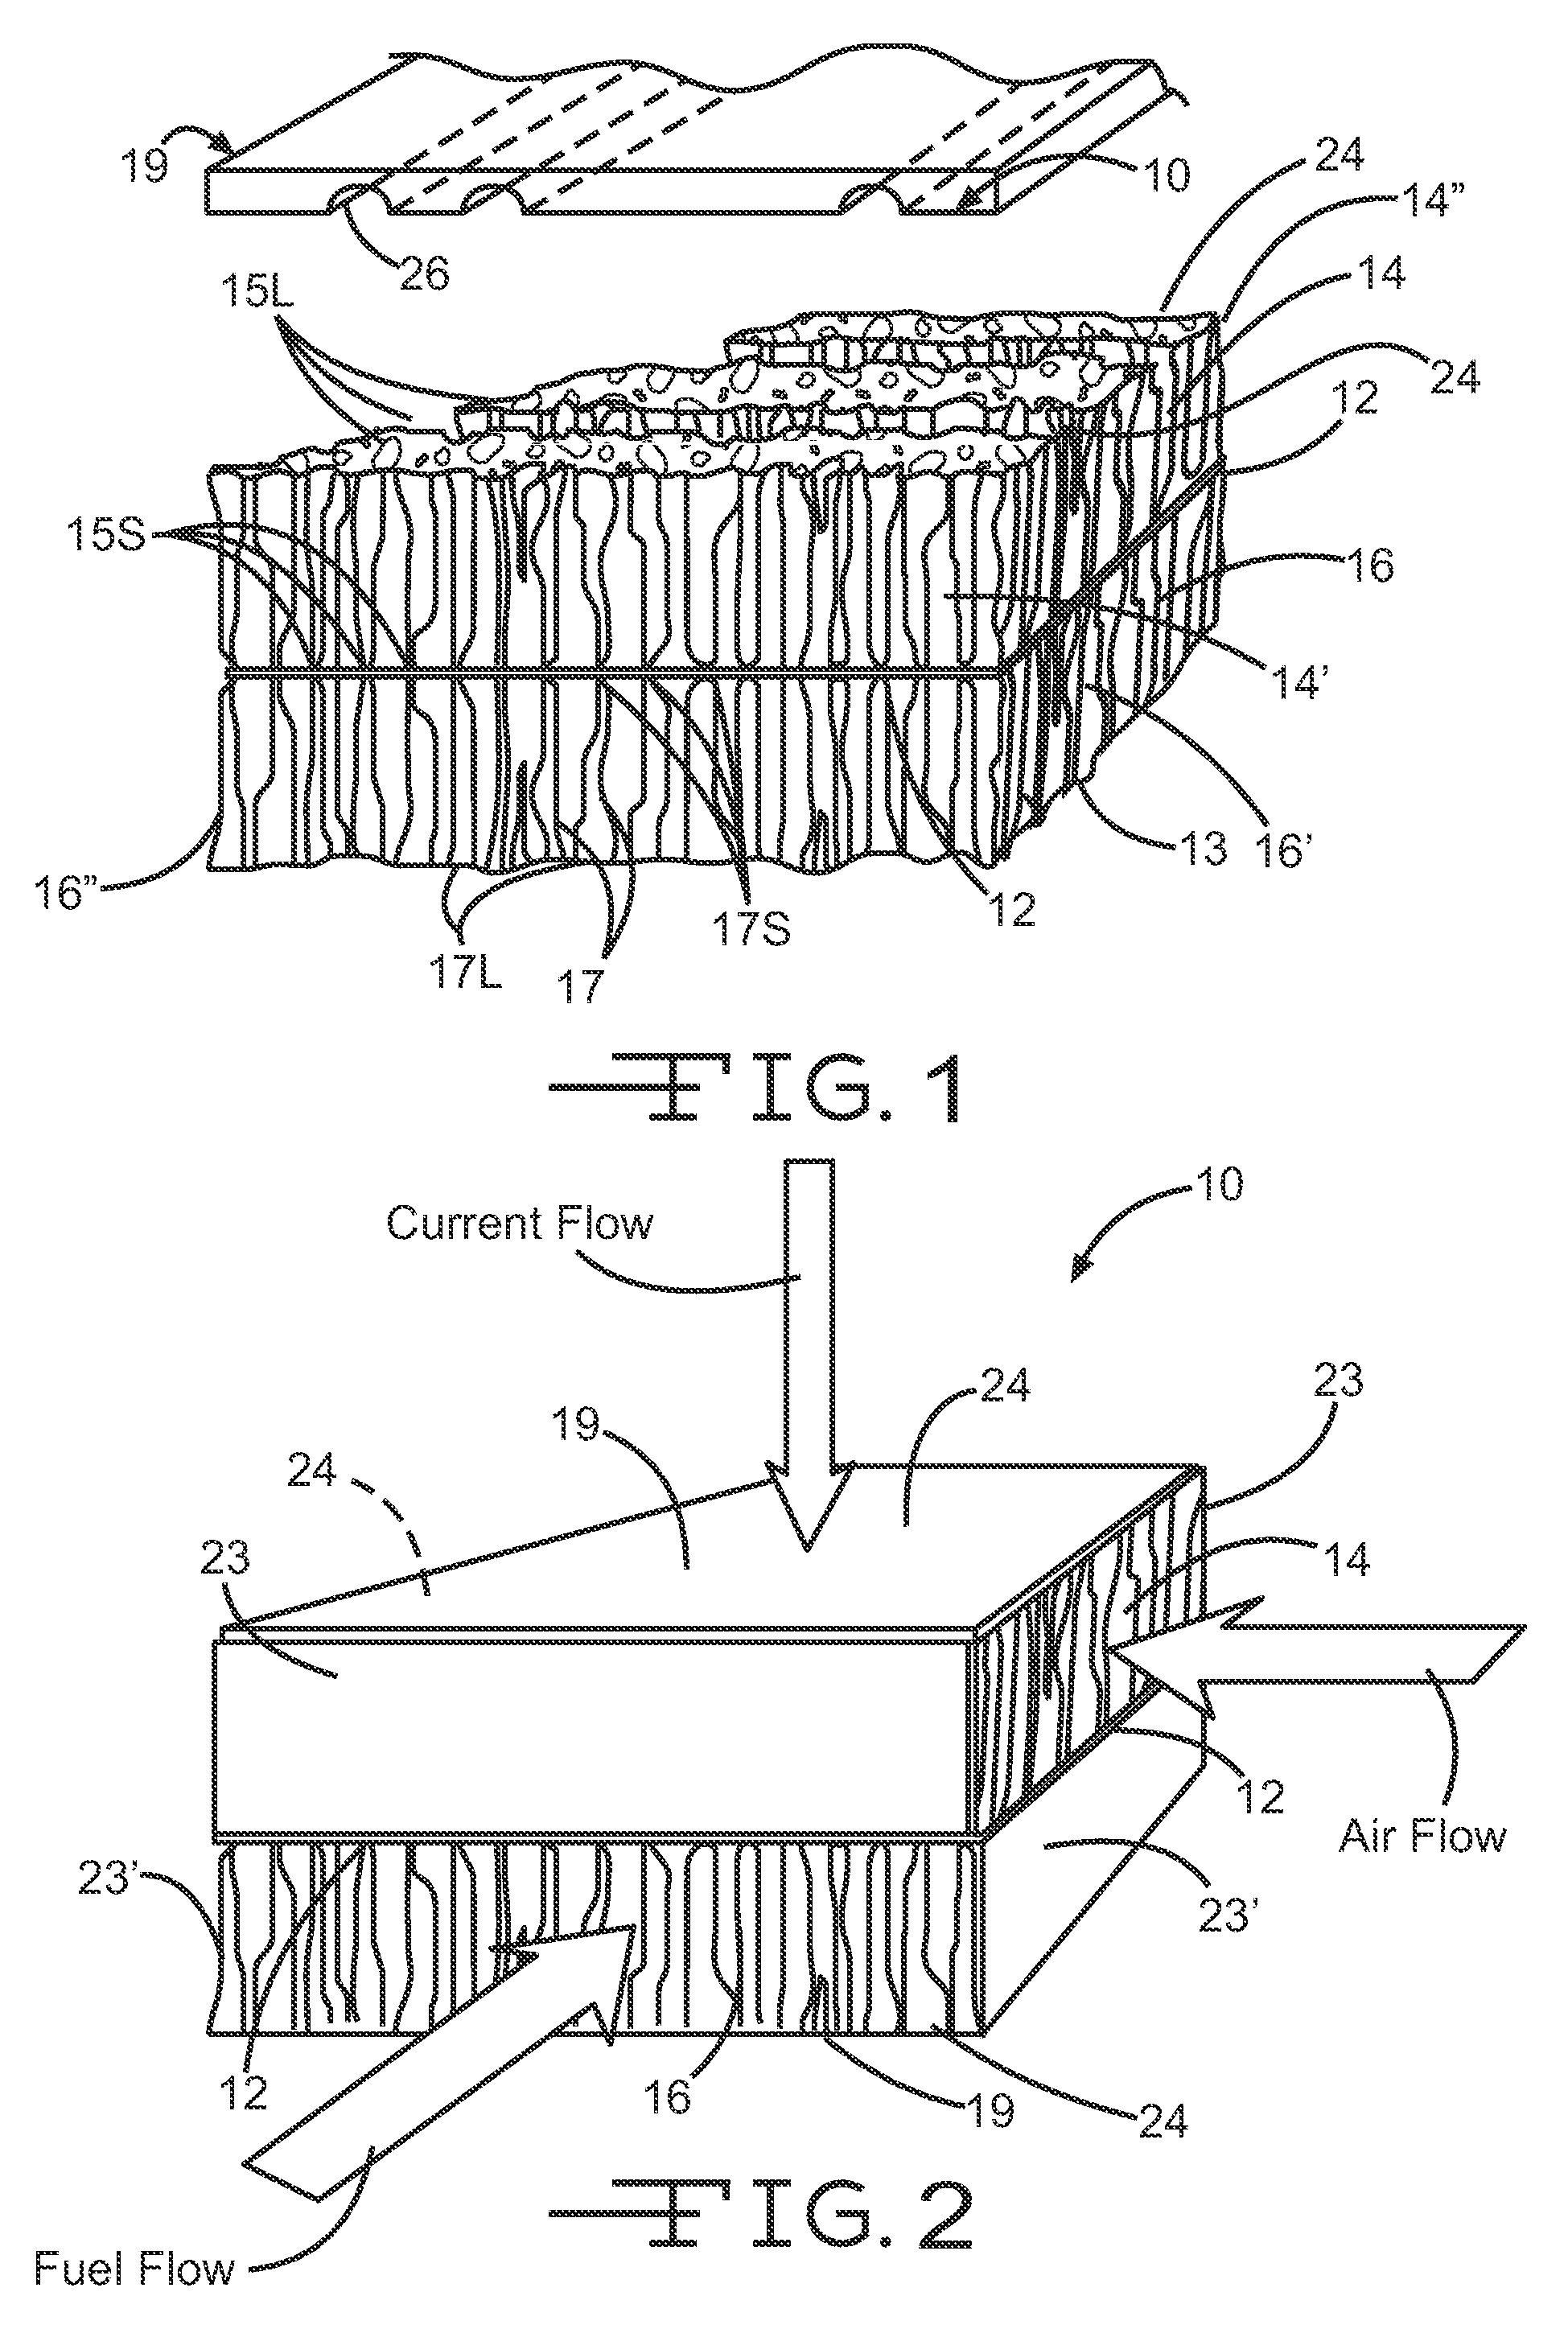 Bi-electrode supported solid oxide fuel cells having gas flow plenum channels and methods of making same